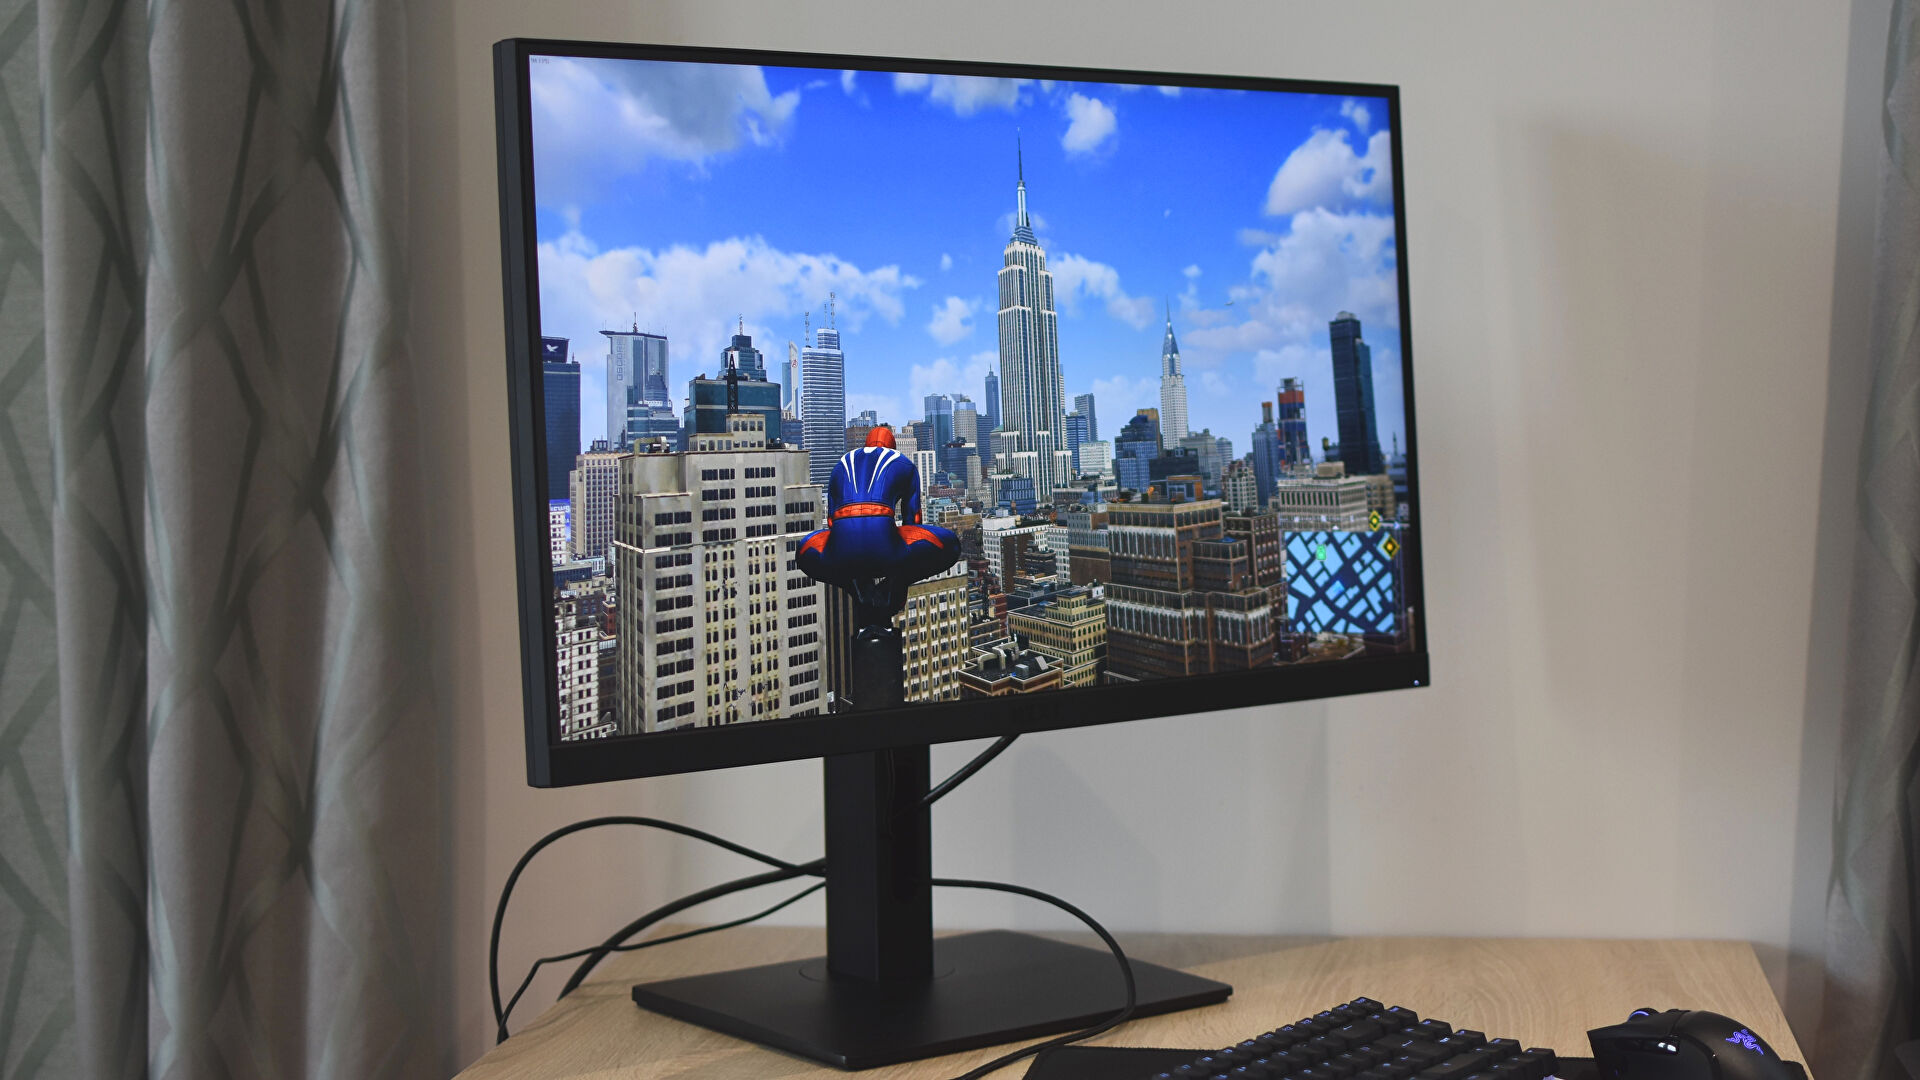 NZXT’s brilliant 1440p gaming monitor is nearly £120 off in the Black Friday sales